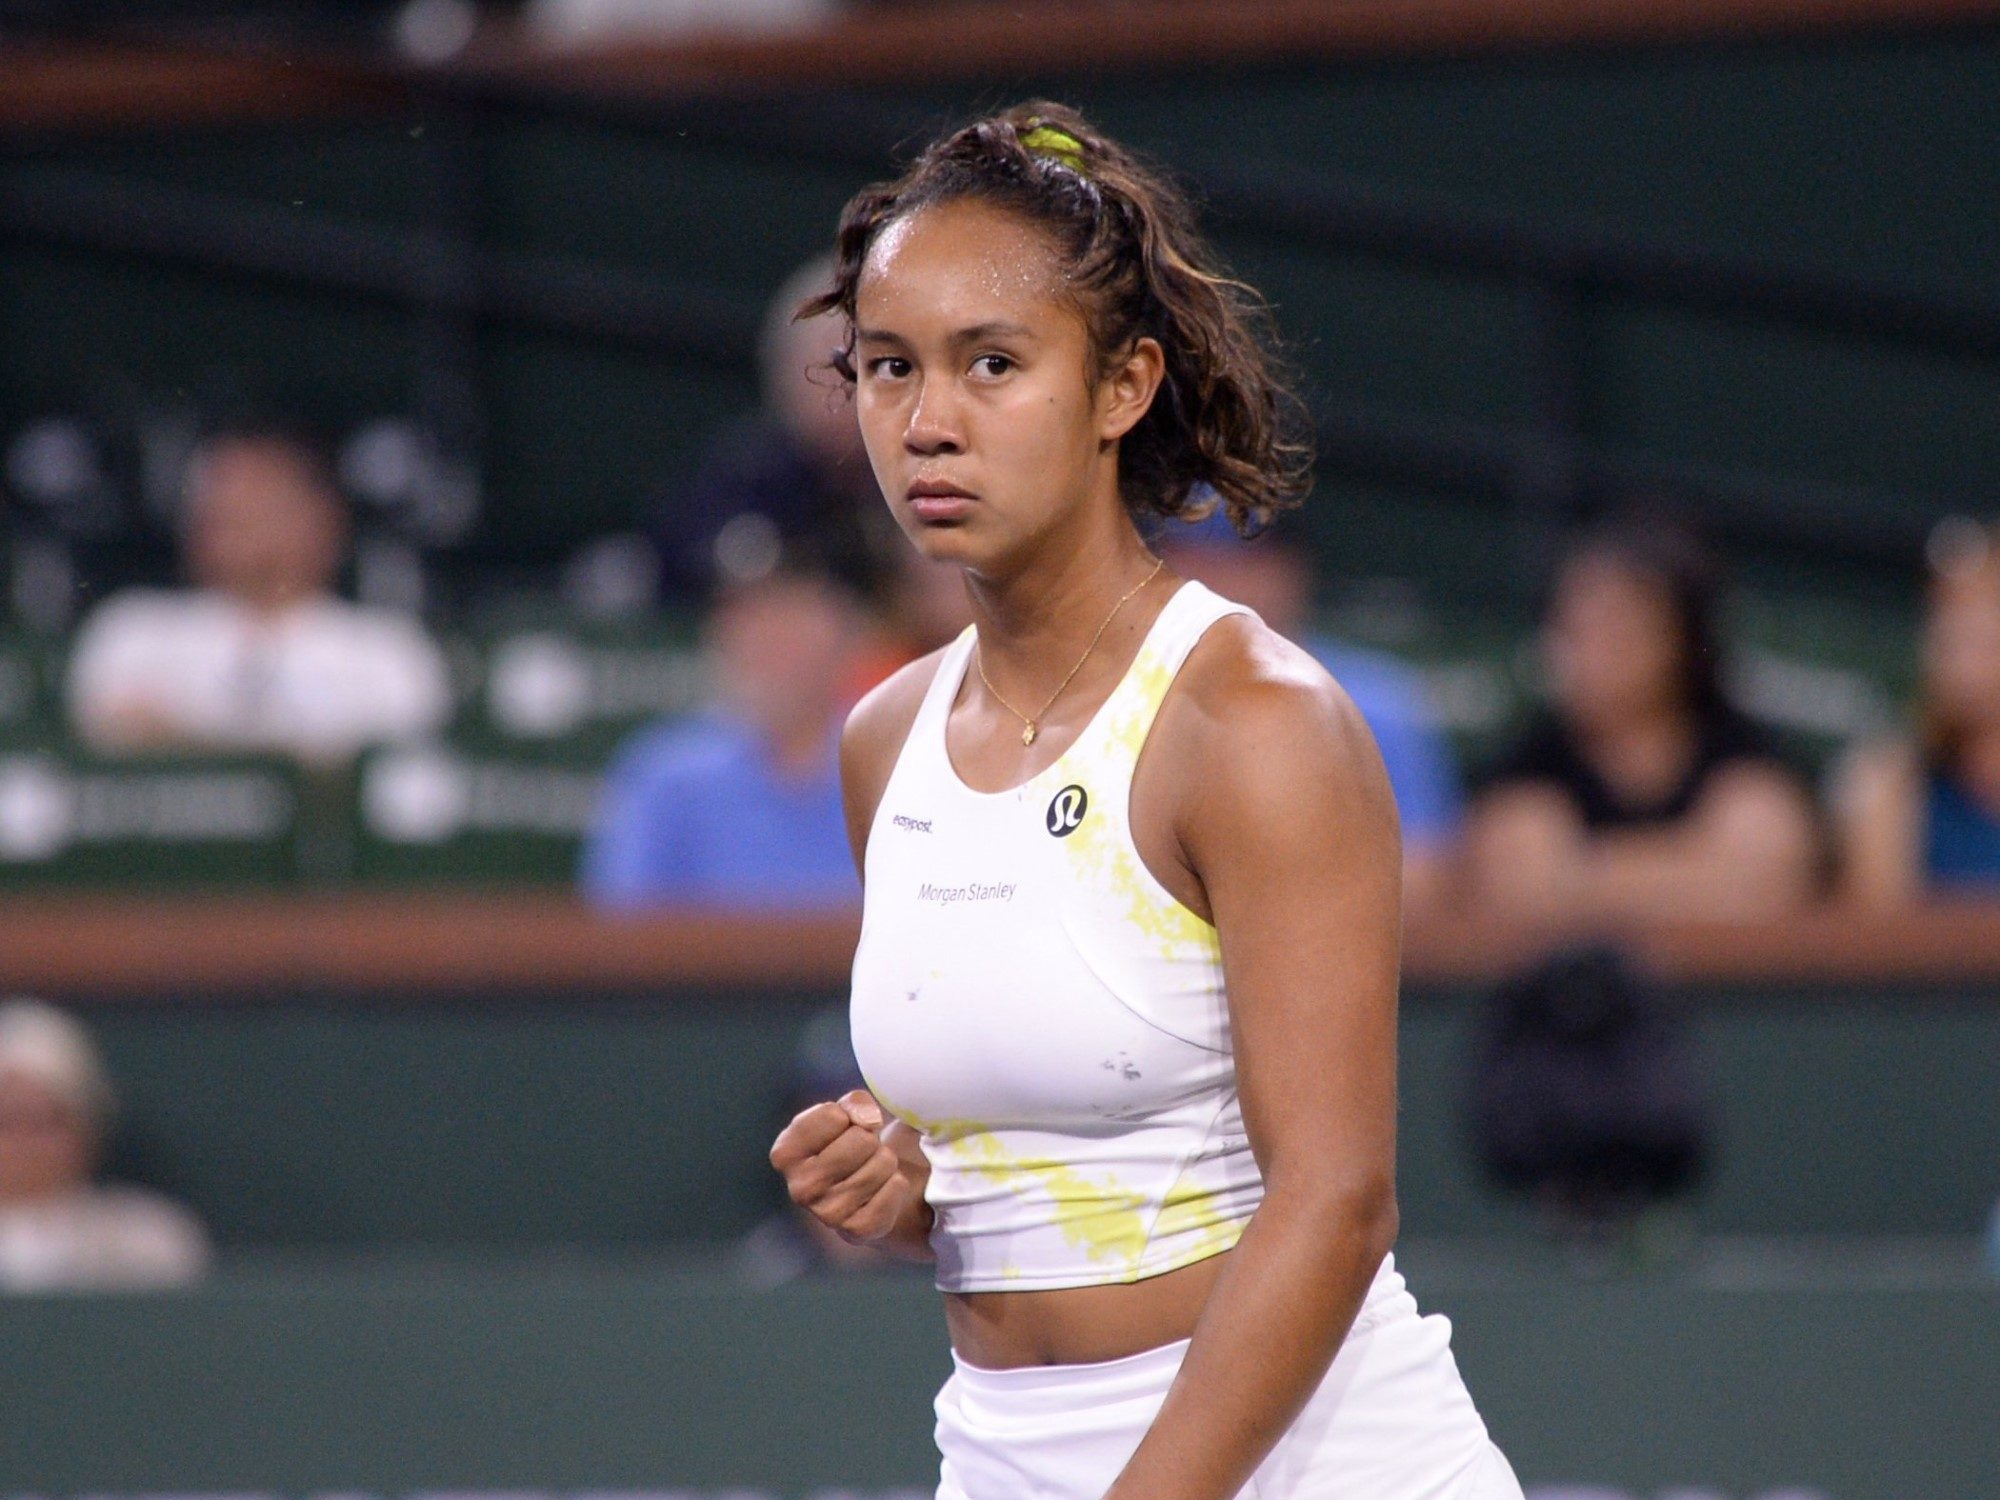 Indian Wells Leylah Annie Fernandez reaches the fourth round for the second straight year